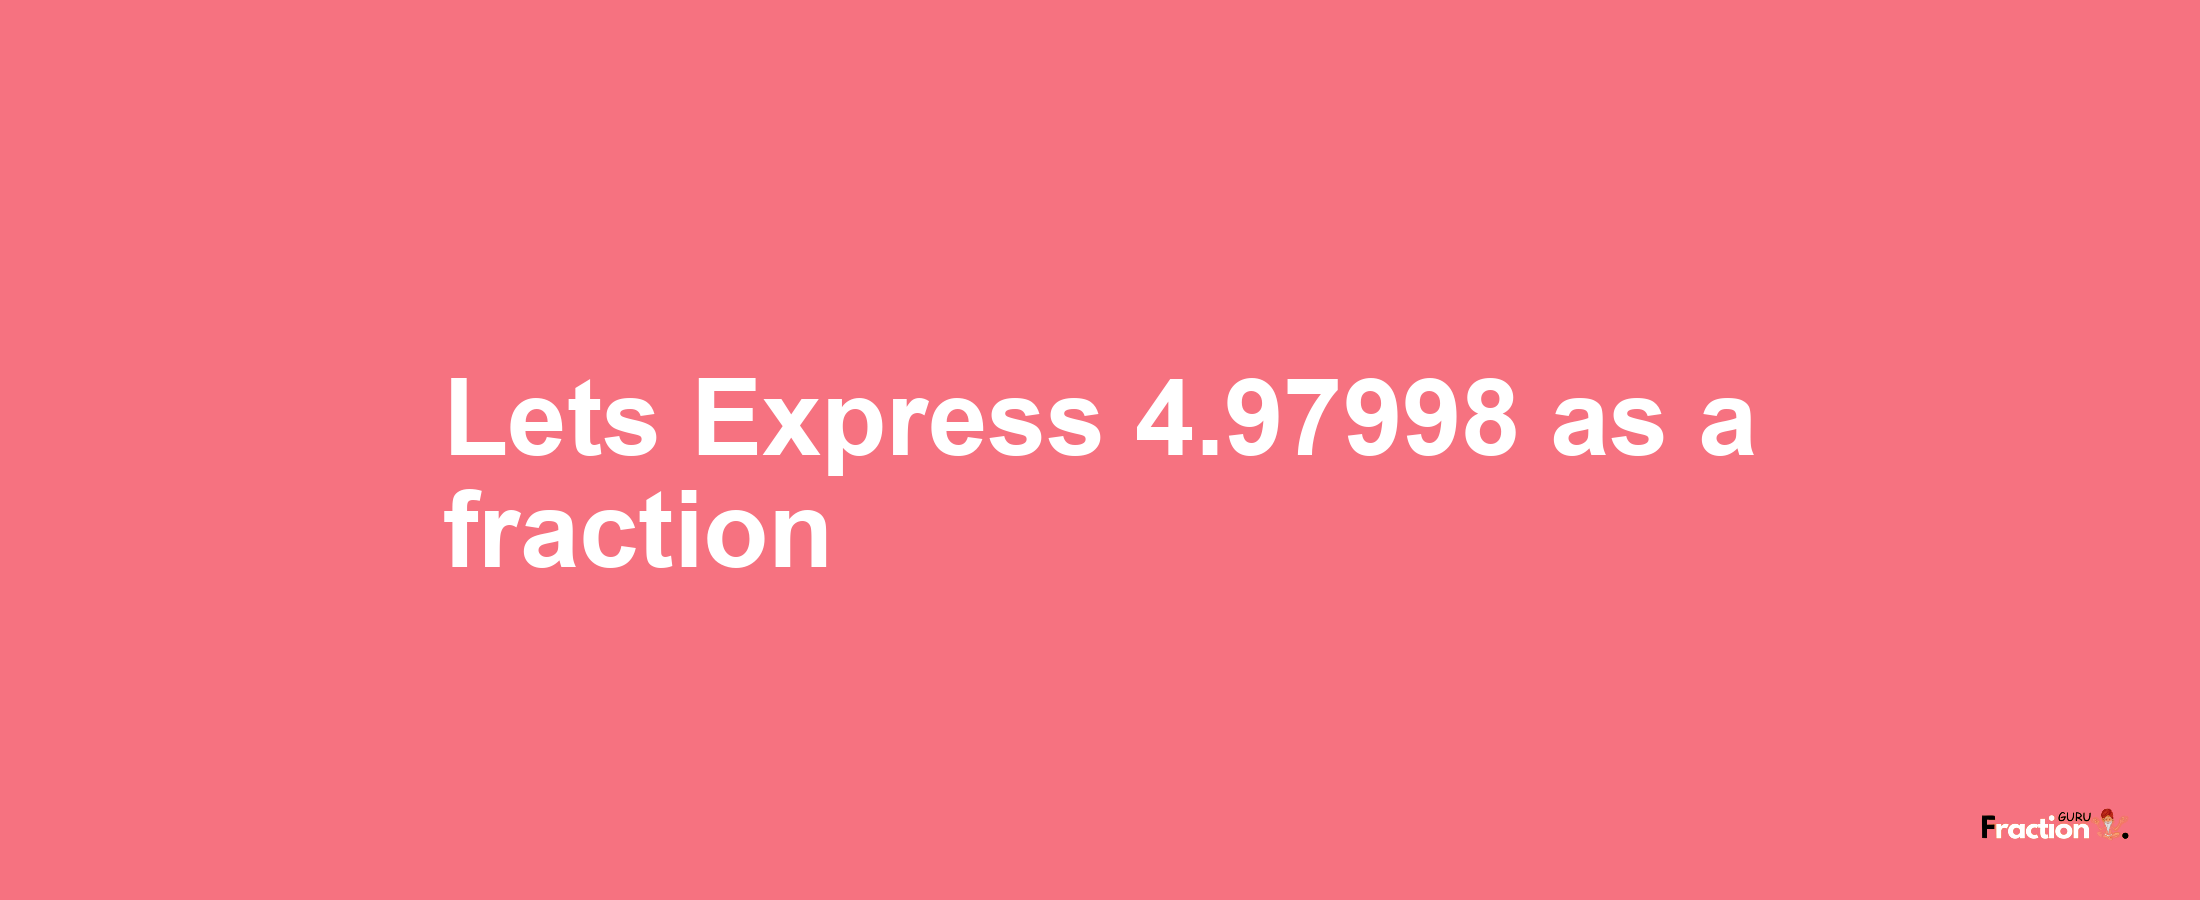 Lets Express 4.97998 as afraction